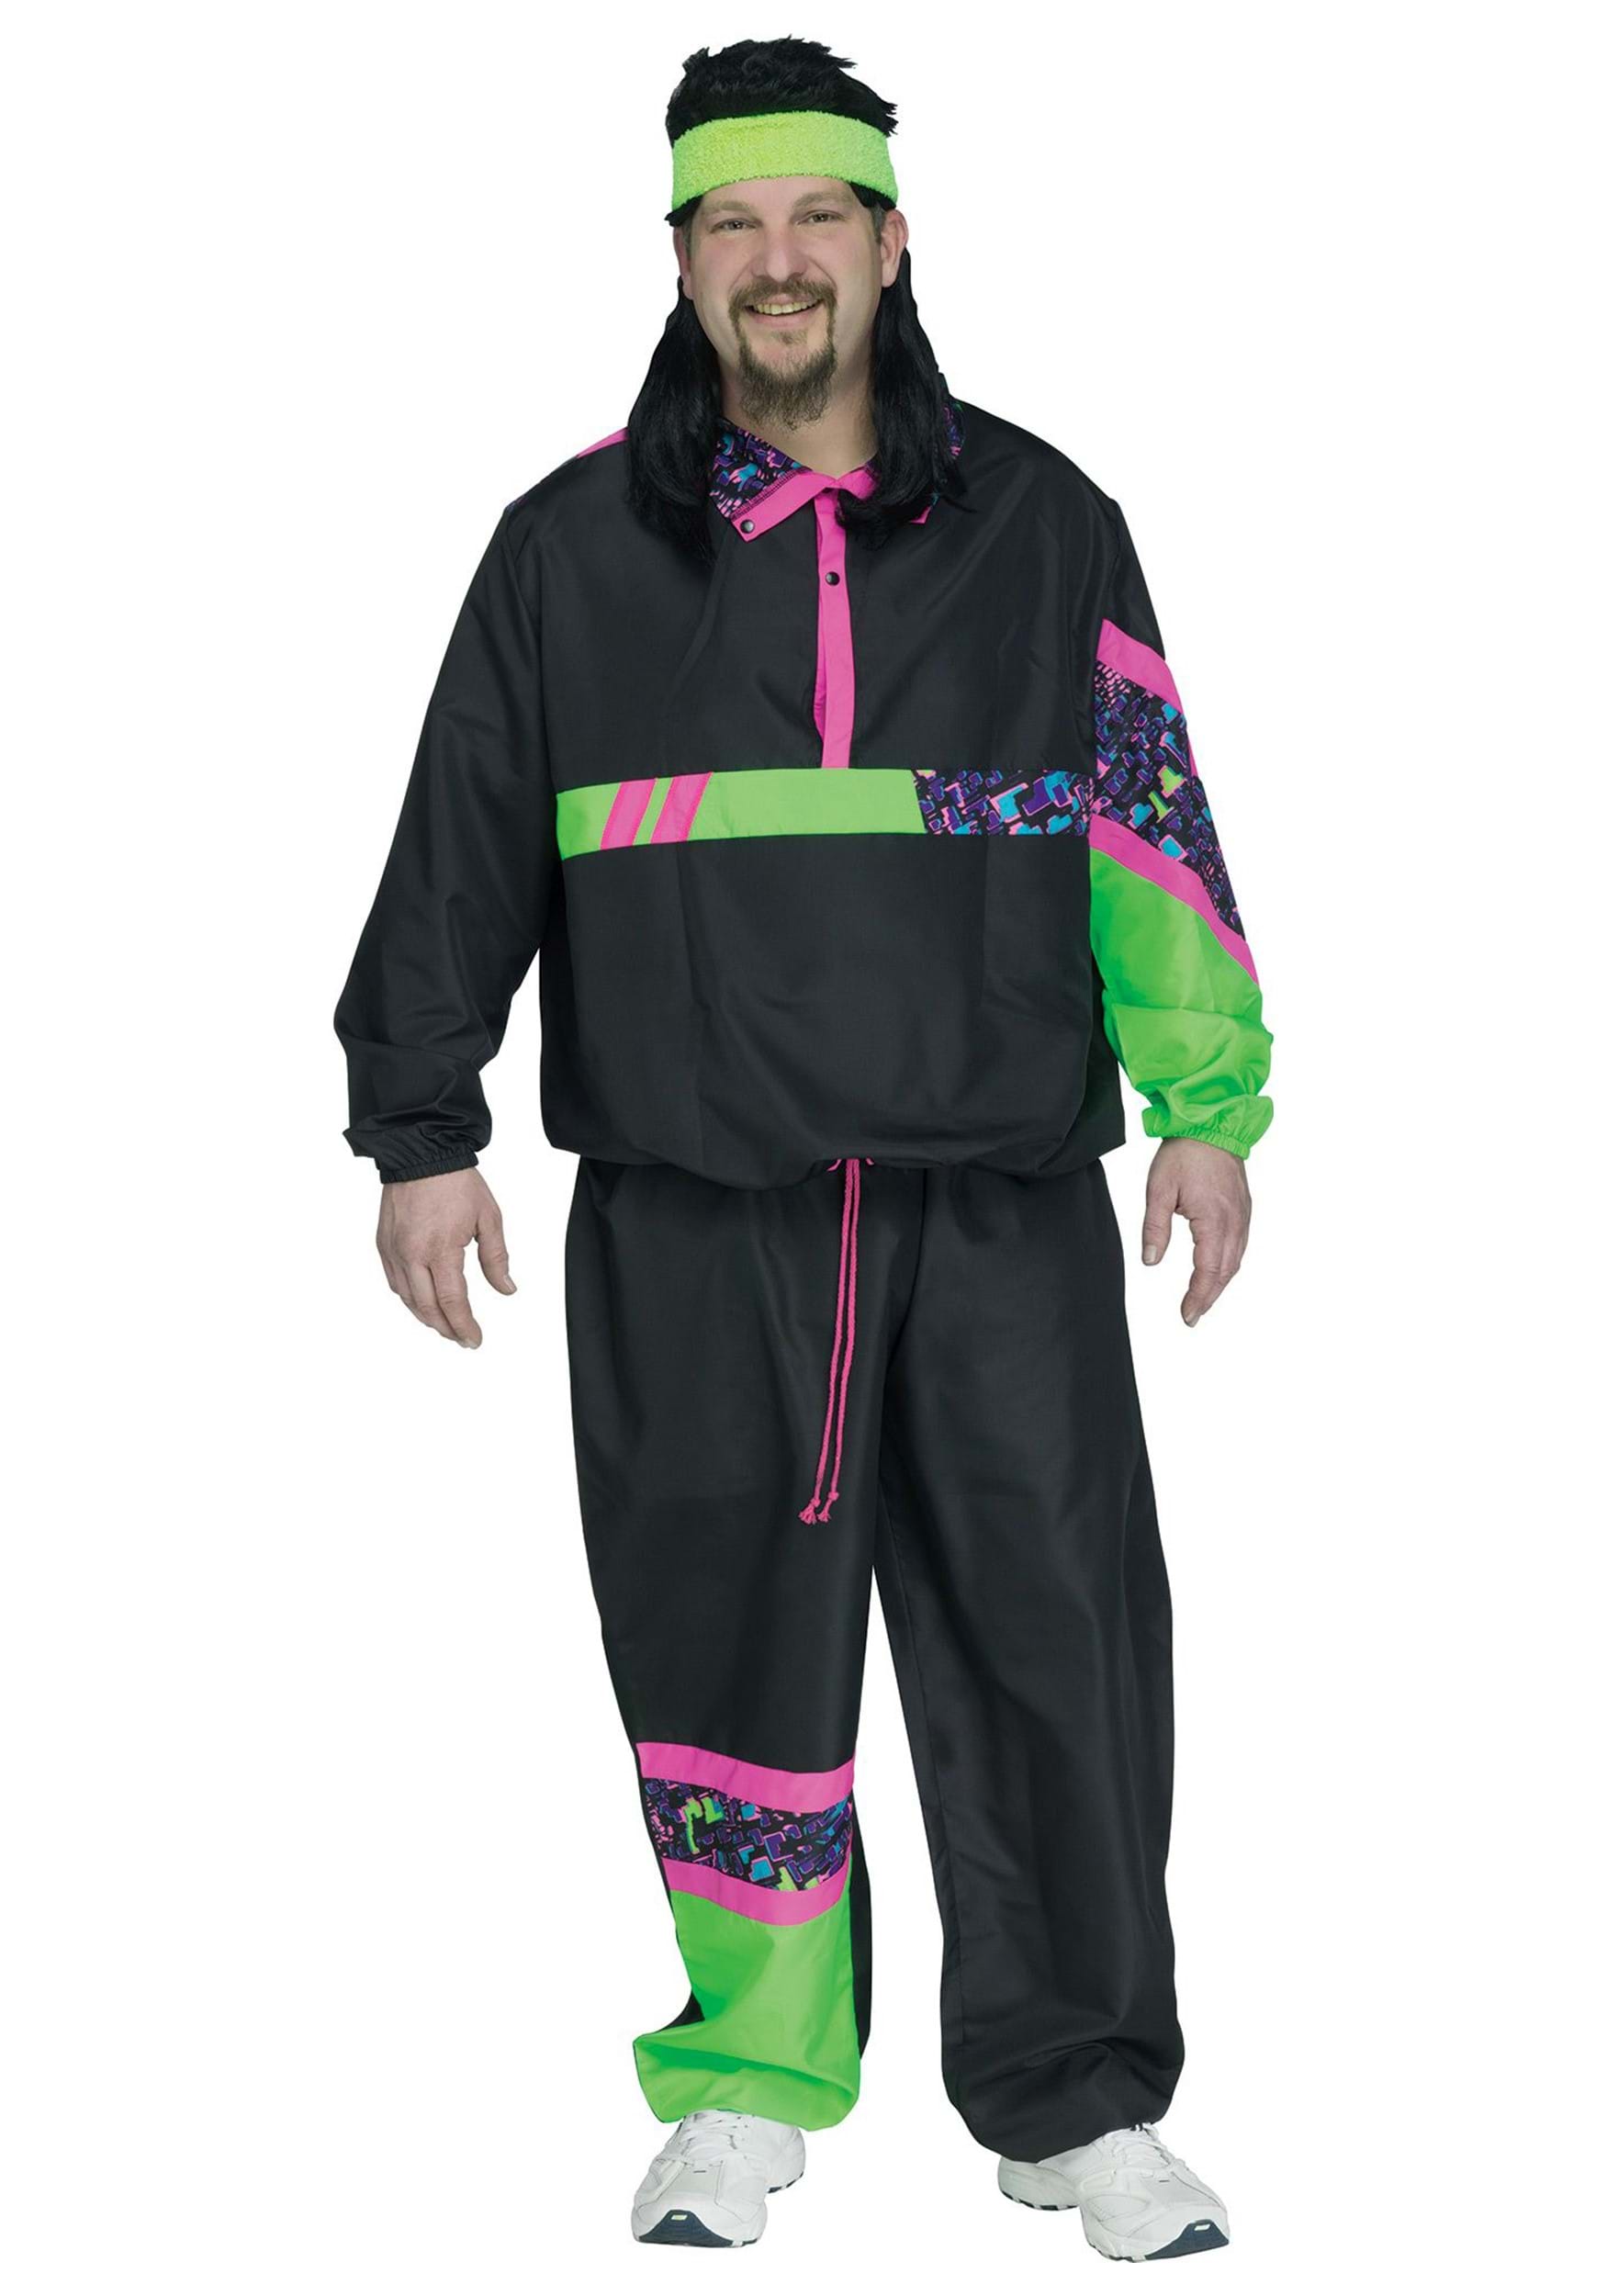 https://images.halloweencostumes.ca/products/91981/1-1/mens-plus-size-80s-track-suit-costume.jpg